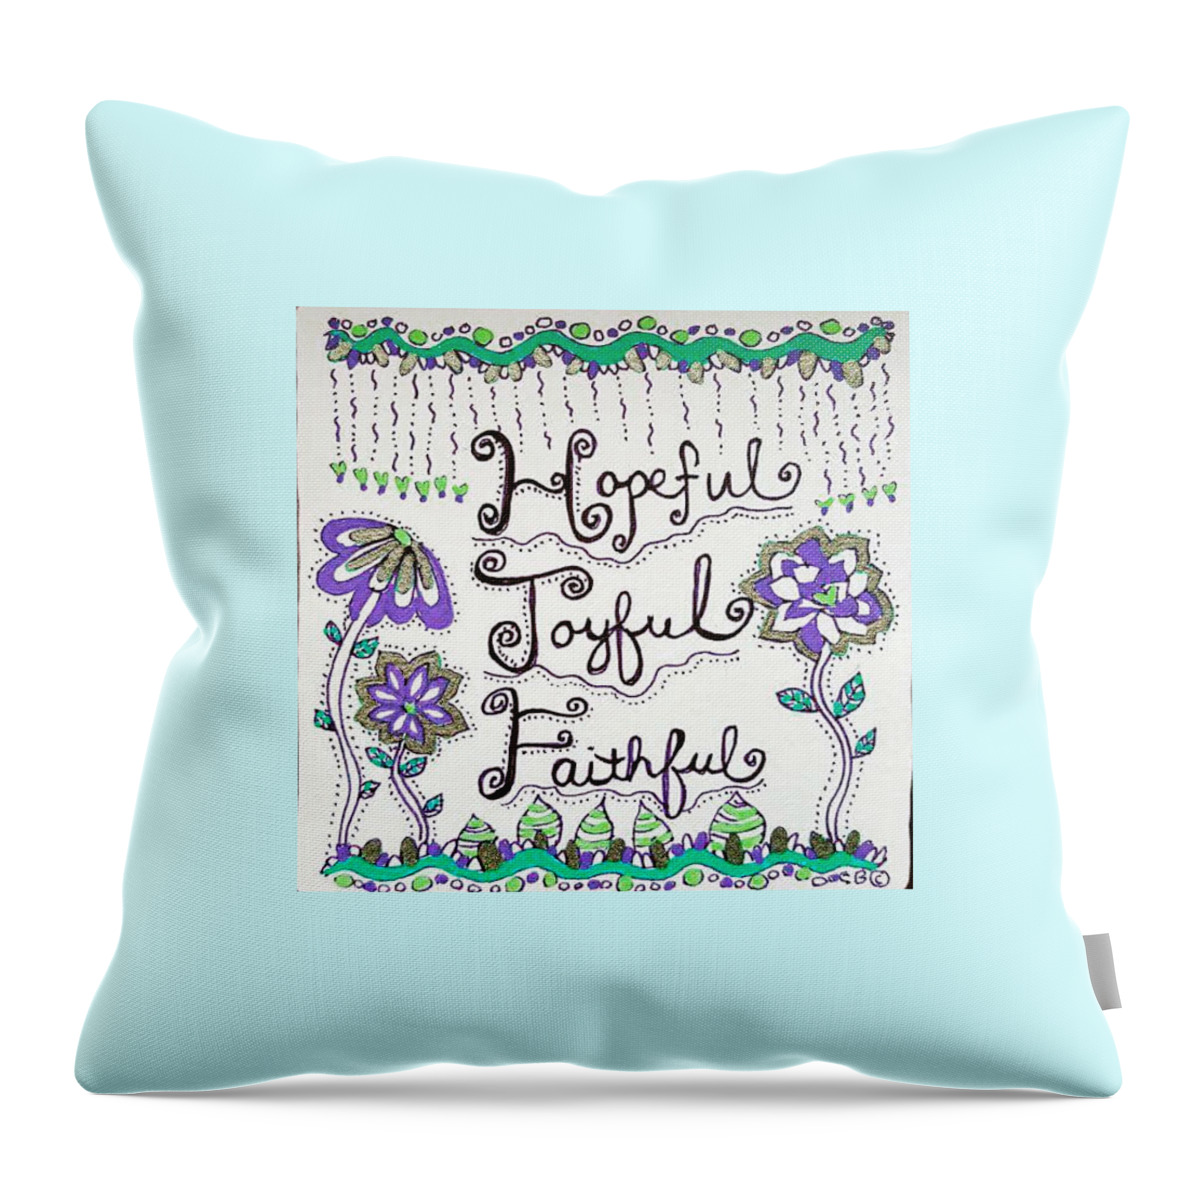 Zentangle Throw Pillow featuring the drawing Faithful by Carole Brecht